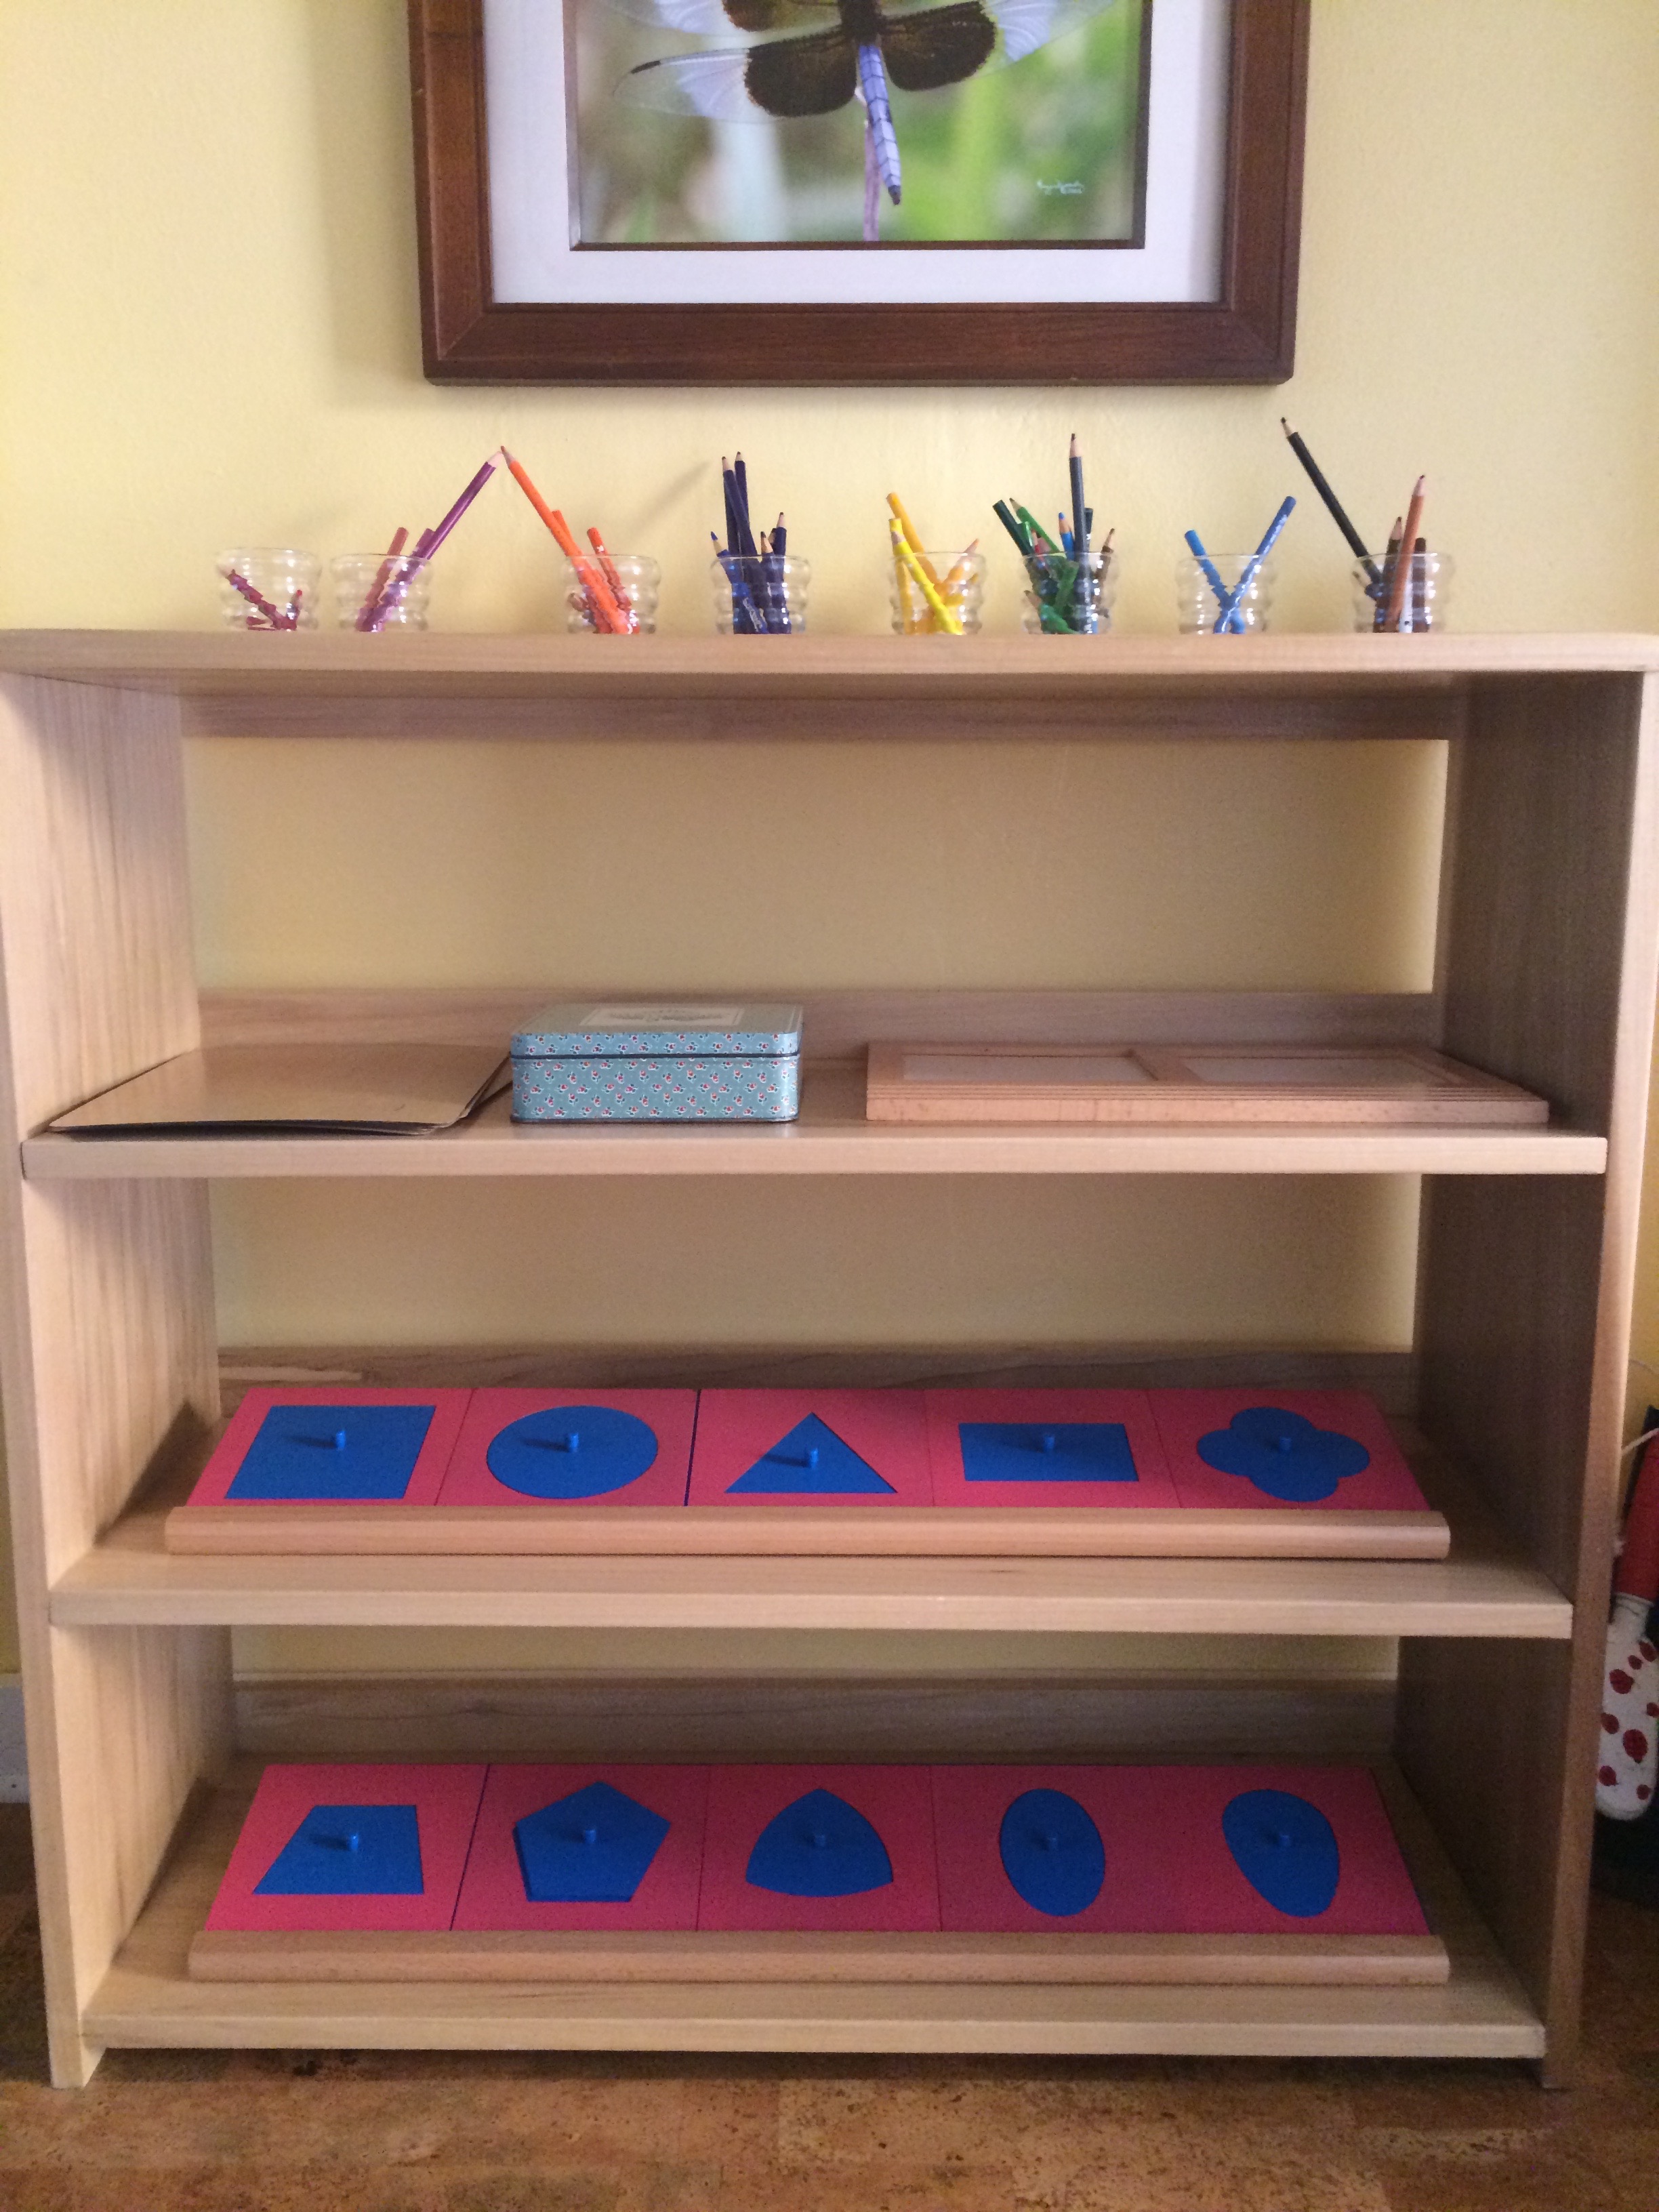 This custom-made shelf includes pencils, paper, trays and the pink frames and the blue insets.